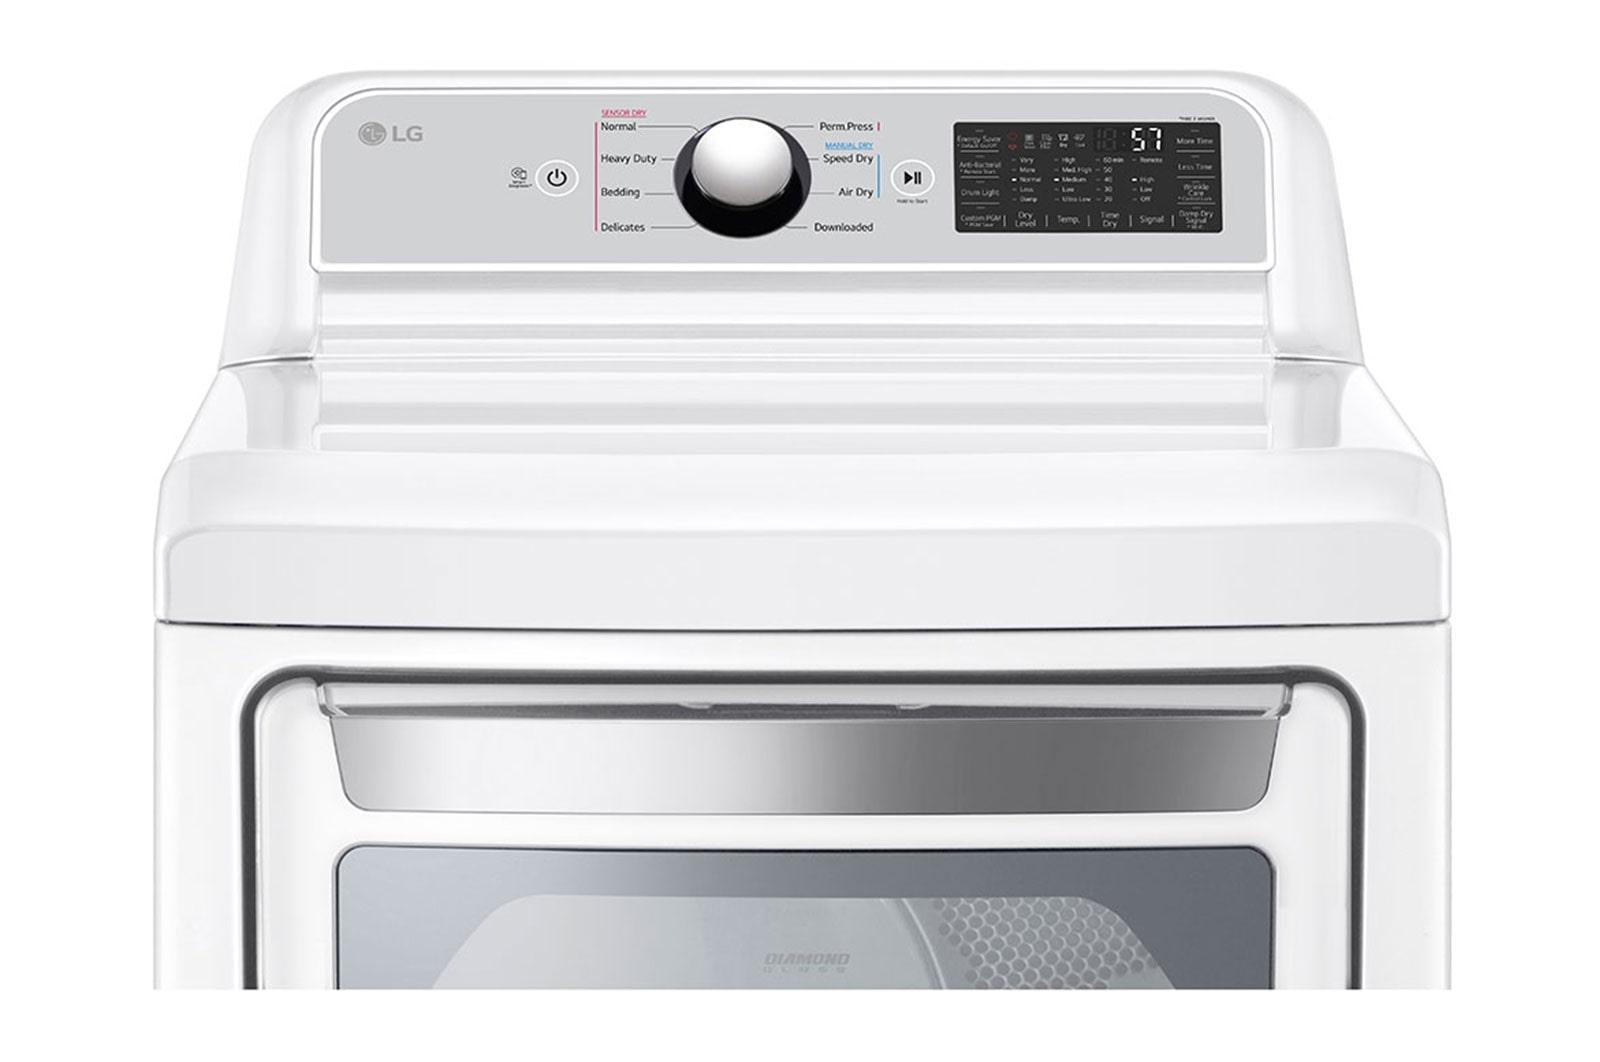 Lg DLE7400WE 7.3 Cu. Ft. Ultra Large Capacity Smart Wi-Fi Enabled Rear Control Electric Dryer With Easyload™ Door